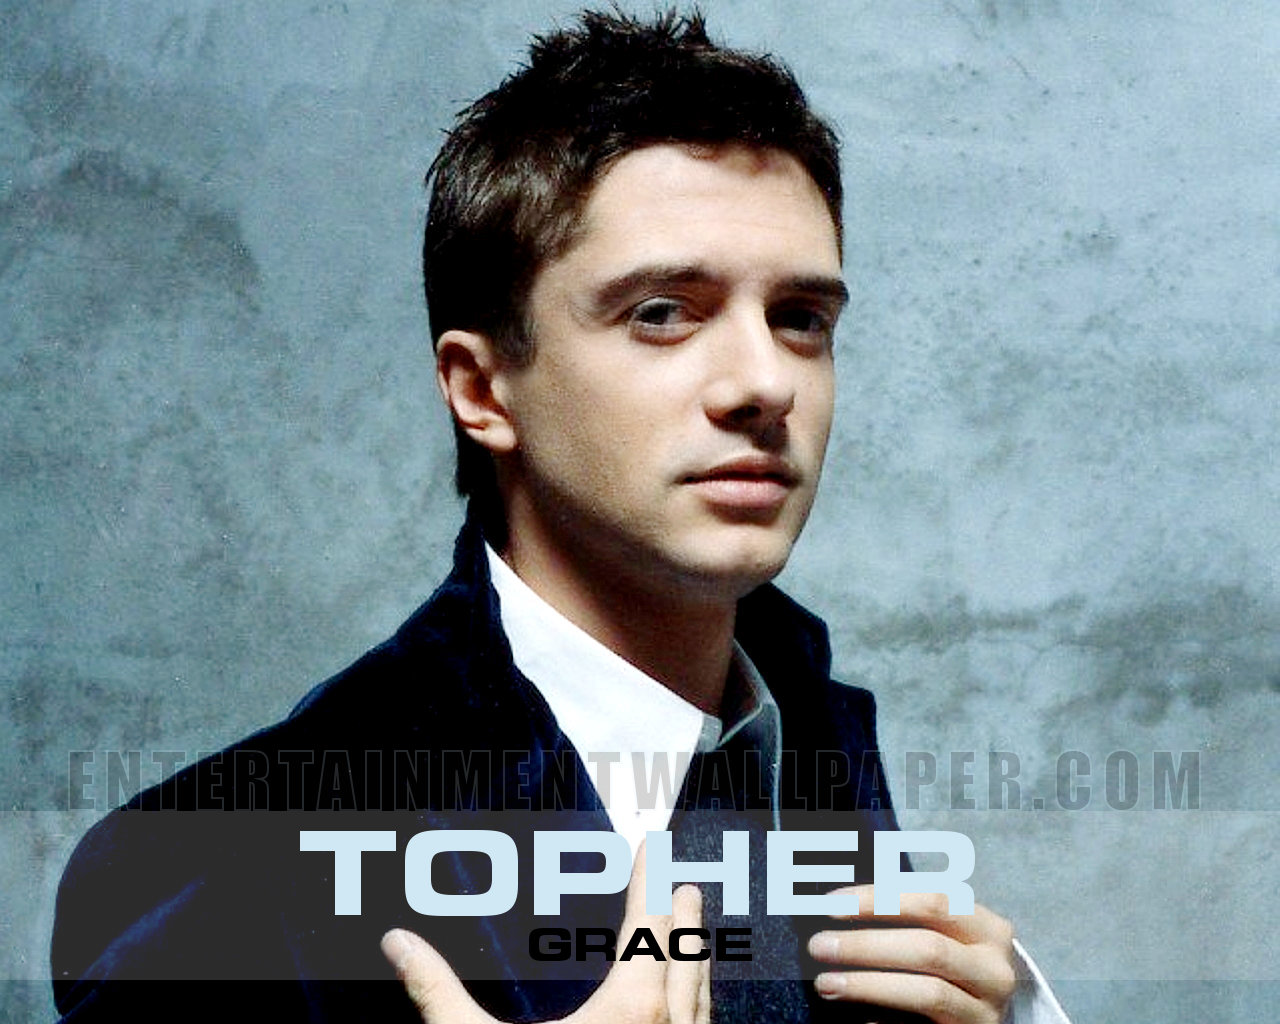 Topher Grace's quote